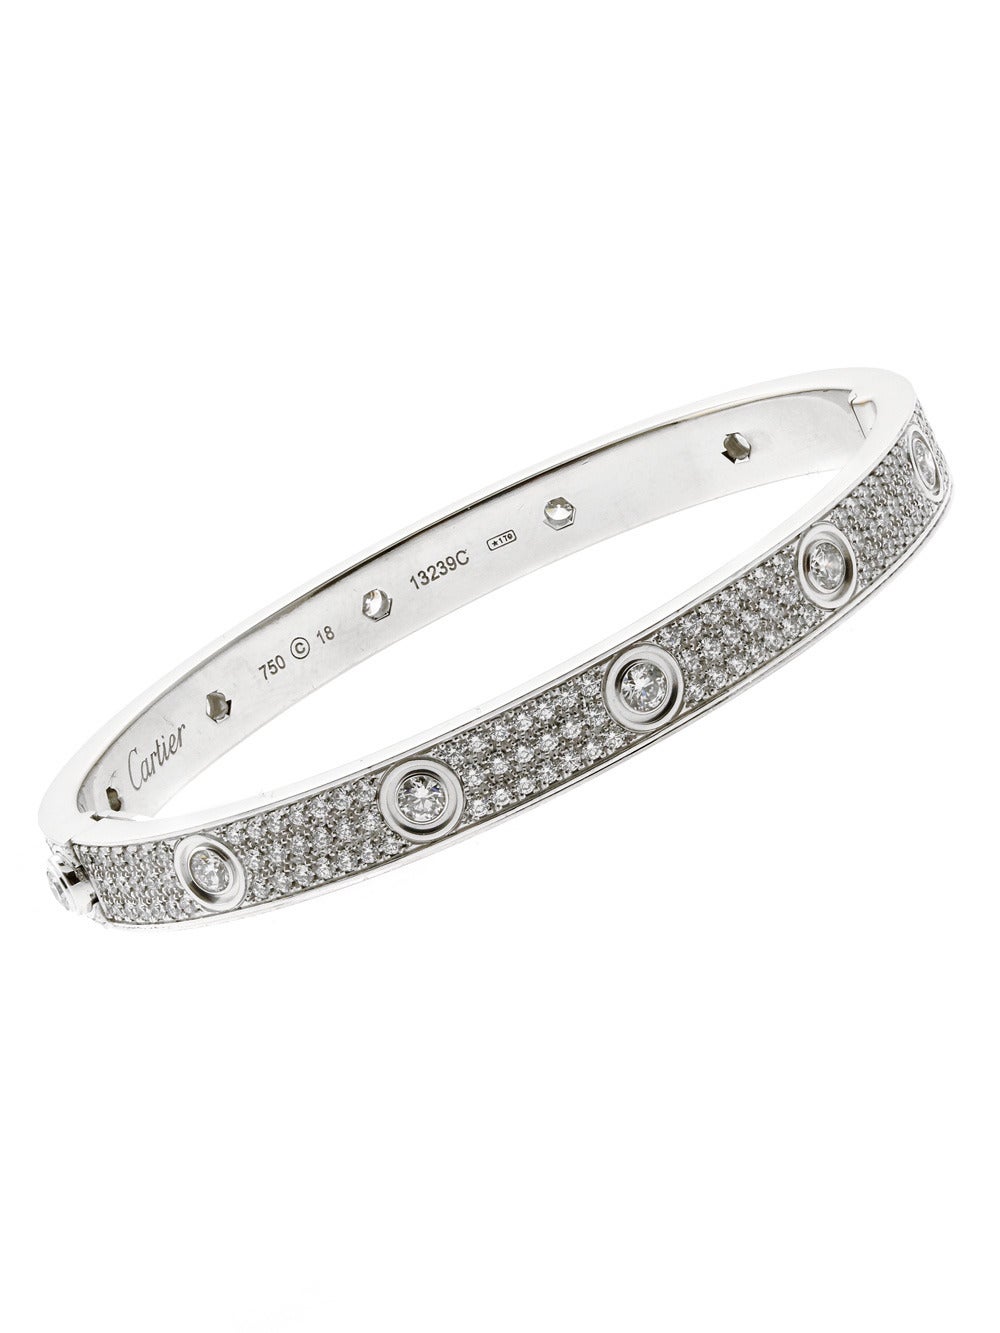 A spectacular Cartier Love Diamond Bangle bracelet crafted in 18k White Gold featuring 3.9cts Vvs1 E-F Color Round Brilliant Cut Diamonds. 

The bracelet measures 18cm and will fit a wrist up to (7.08